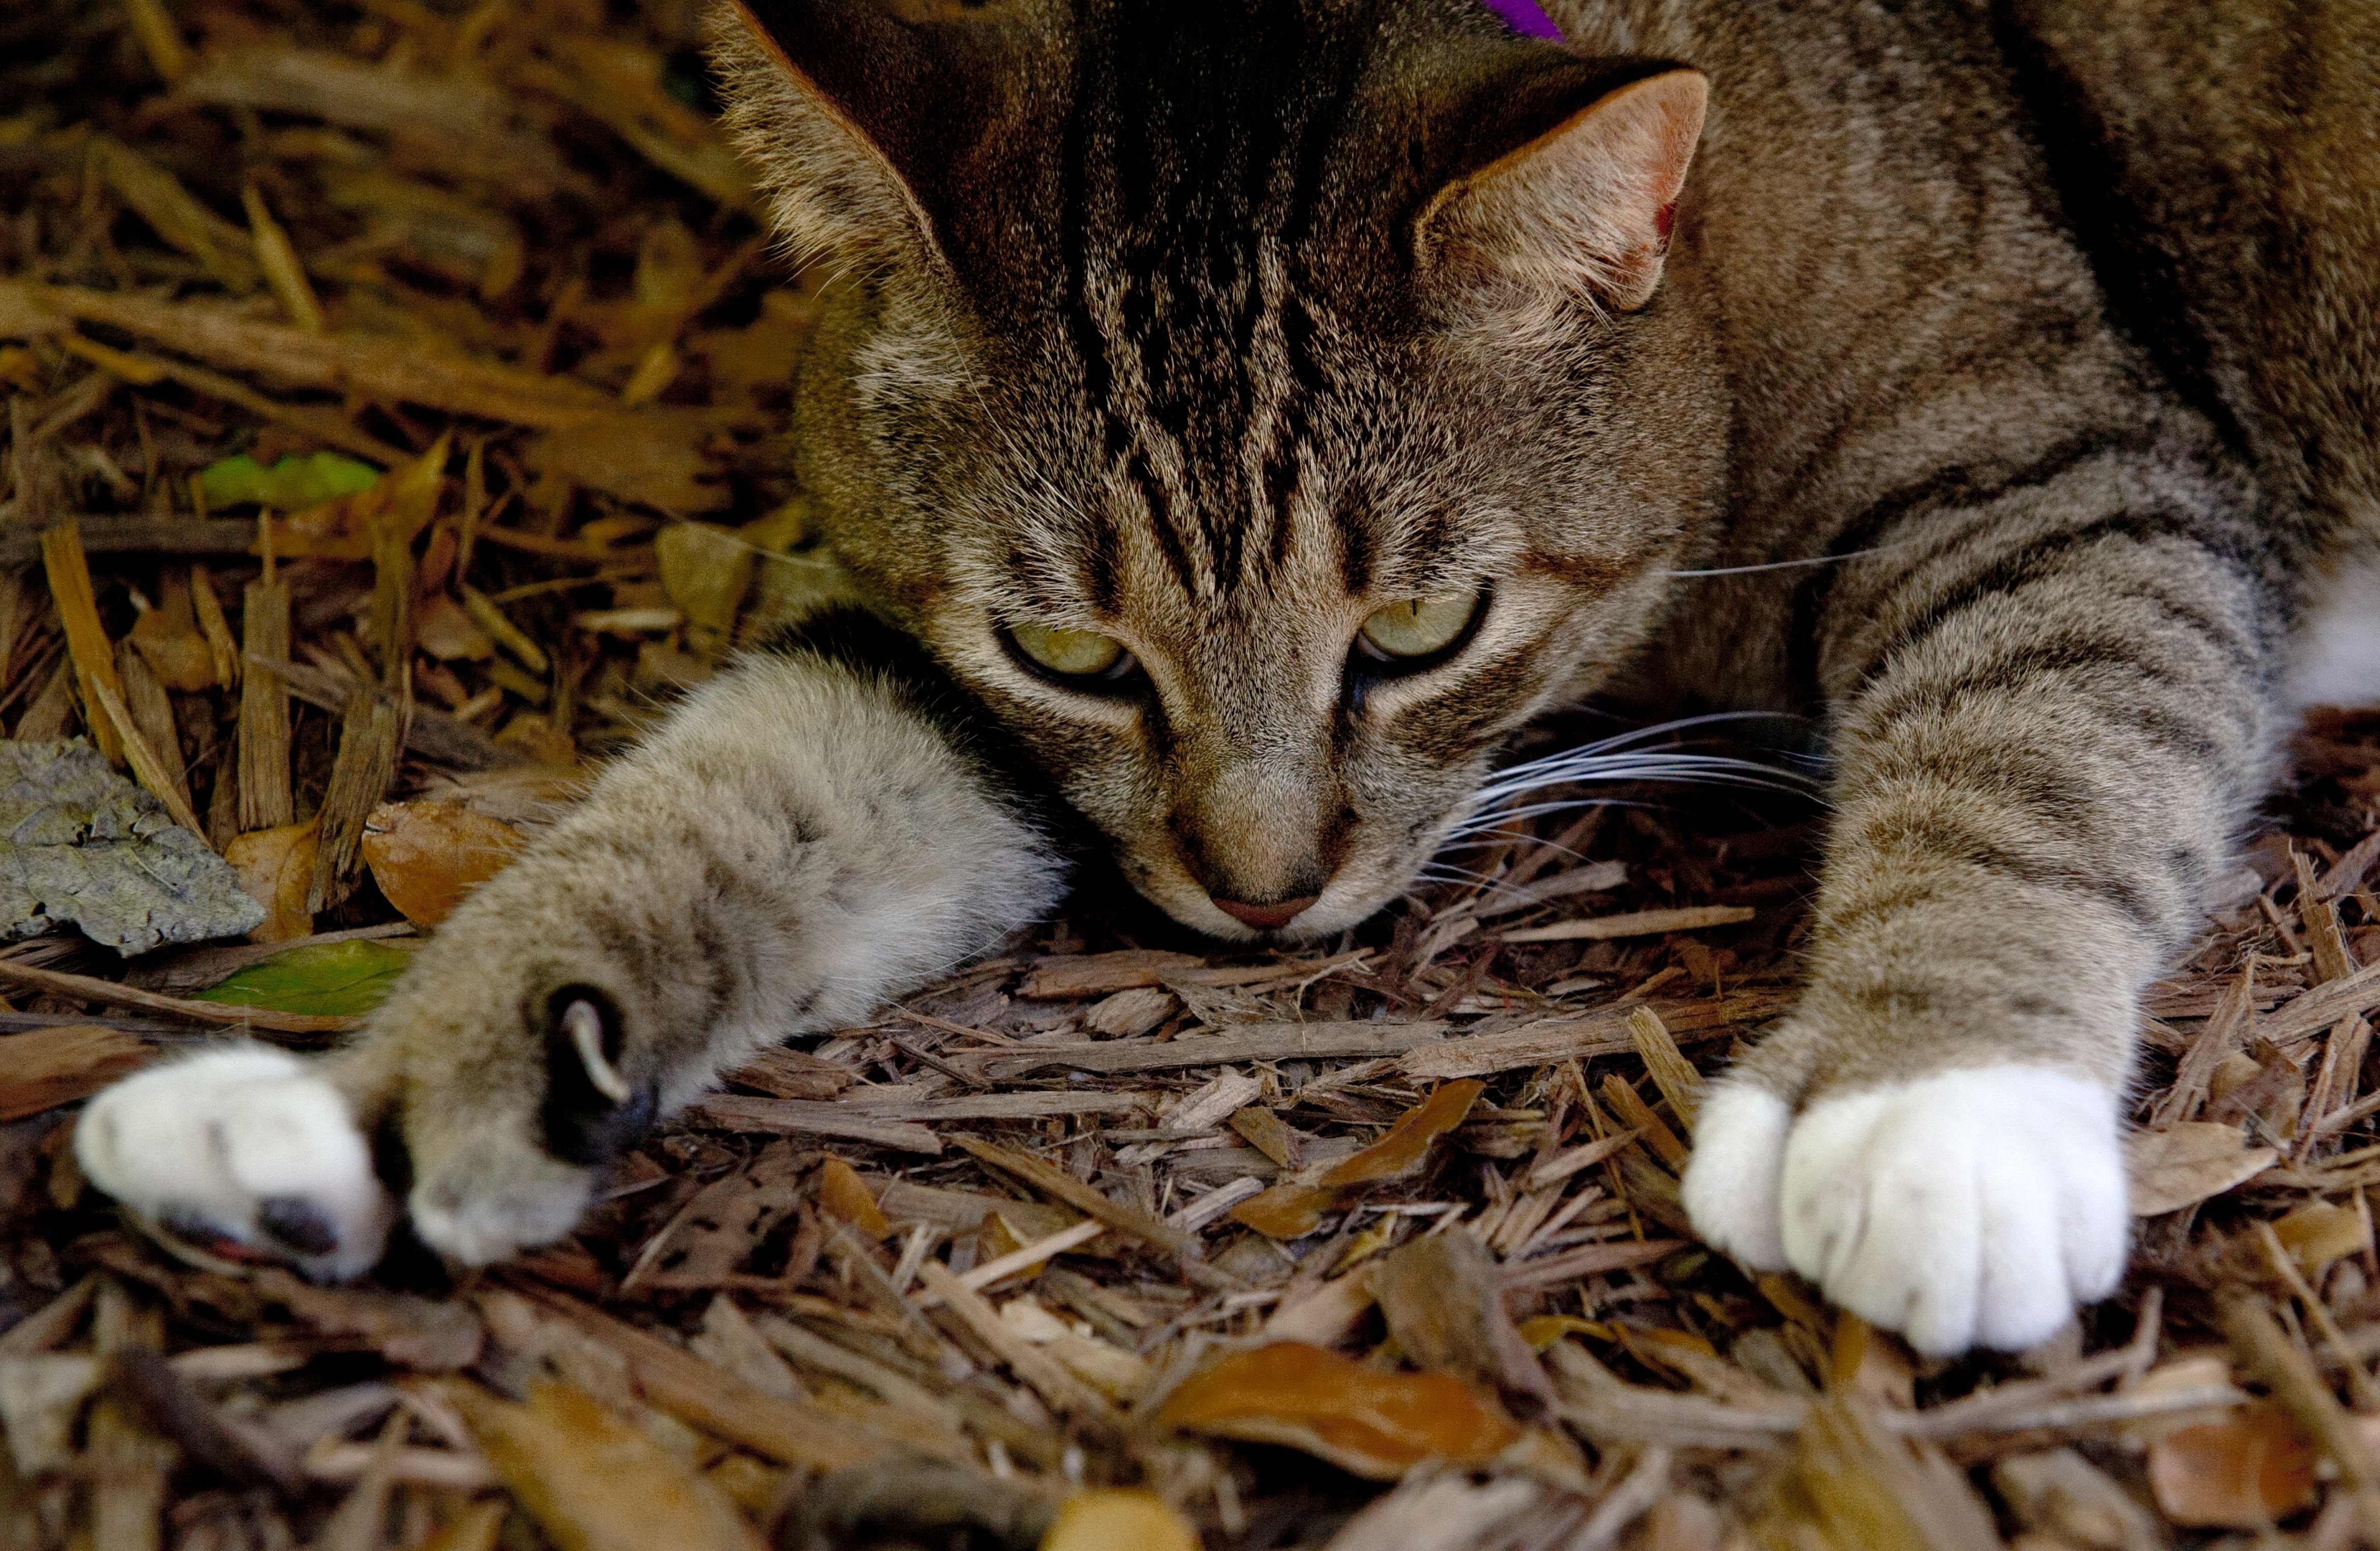 A six-toed cat that is a descendant of a pet owned by writer Ernest Hemingway, at the former home of the author in Key West, Florida. Photo: AFP